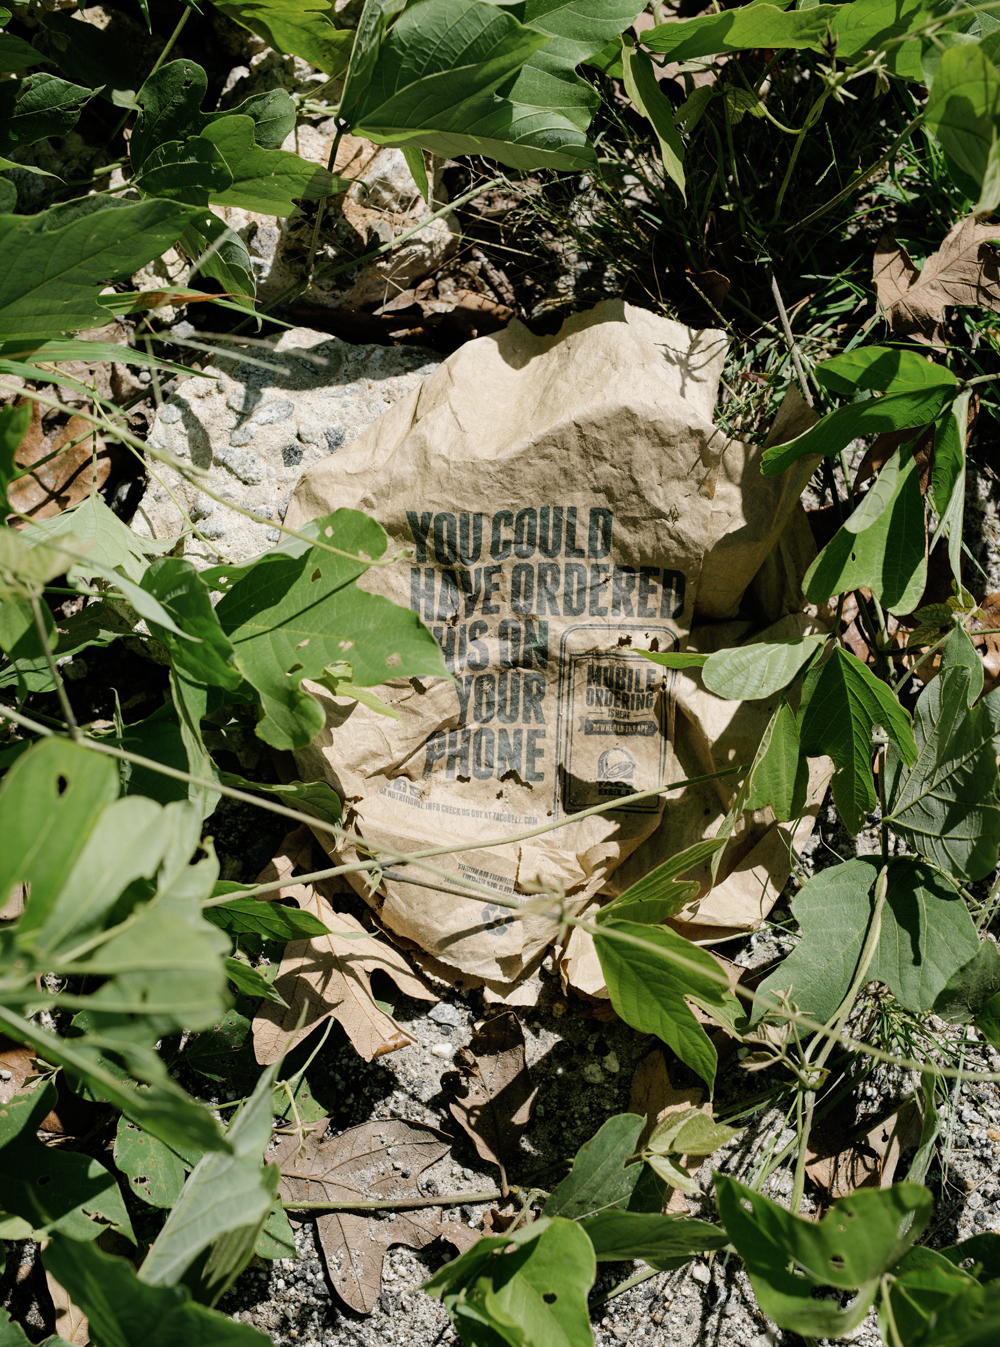 A crumpled paper bag on the ground surrounded by plants